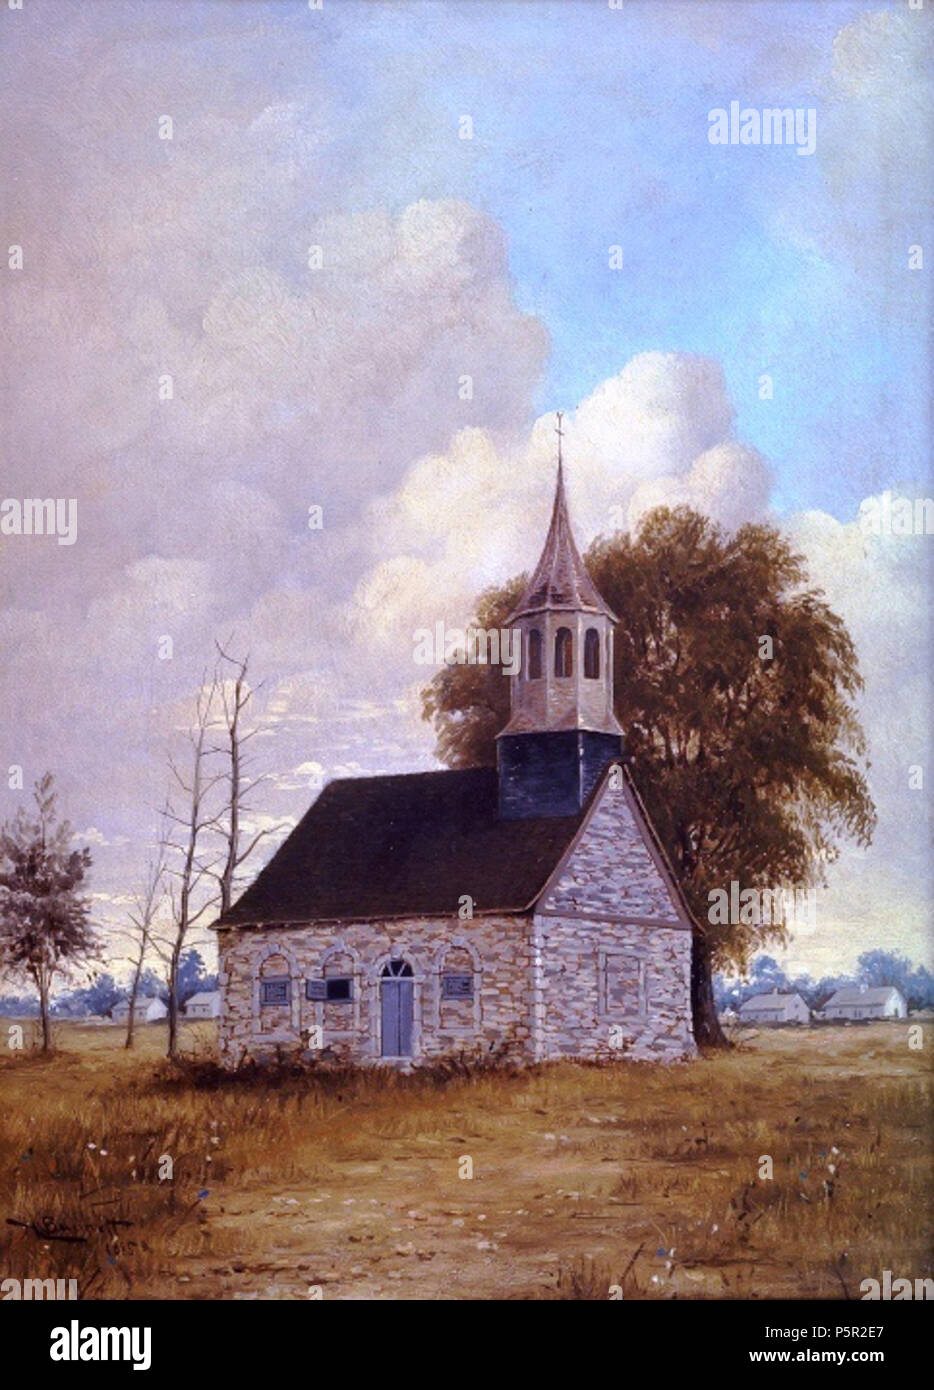 N/A. English: Painting, Berthier en haut, the first Protestant Church in Lower Canada, Henry Richard S. Bunnett, 1885, Oil on canvas, 36.5 x 26.2 cm Français : Peinture, Berthier-en-Haut, la première église protestante dans le Bas-Canada, Henry Richard S. Bunnett, 1885, Huile sur toile, 36.5 x 26.2 cm . 1885. Henry Richard S. Bunnett 194 Berthier en haut, the first Protestant Church in Lower Canada Stock Photo